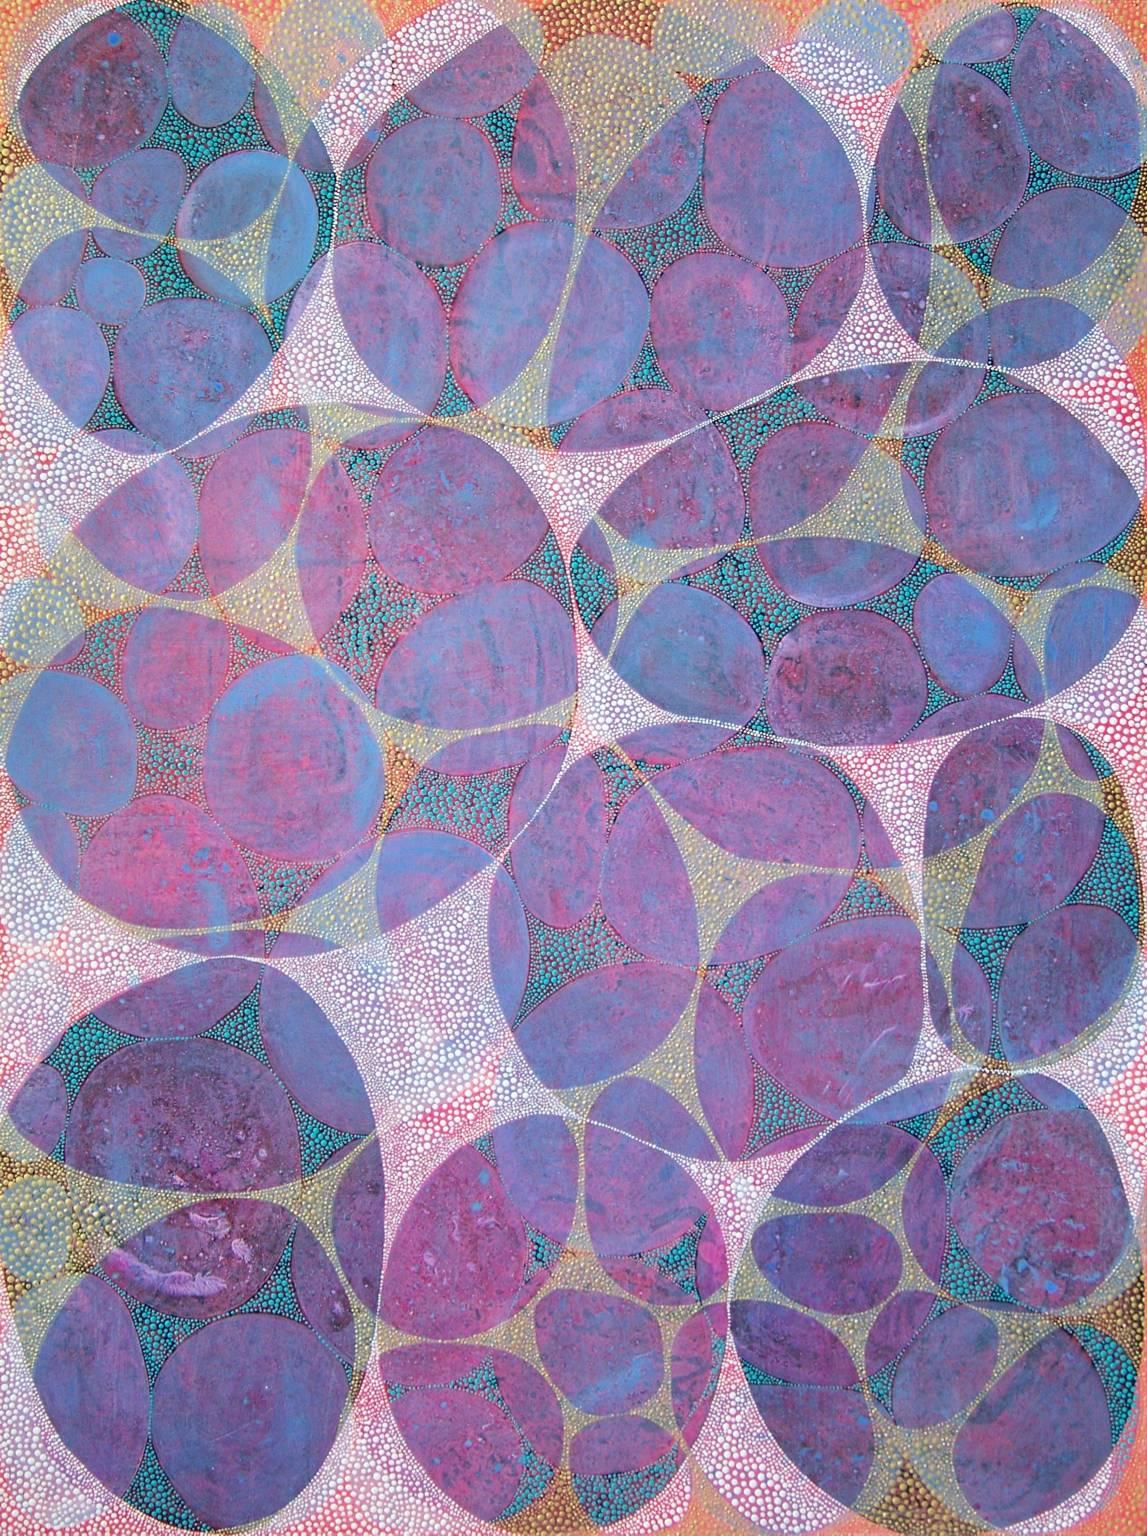 Denise Driscoll Abstract Painting - "Entanglement 3", abstract, violets, blues, teal, red, gold, acrylic painting